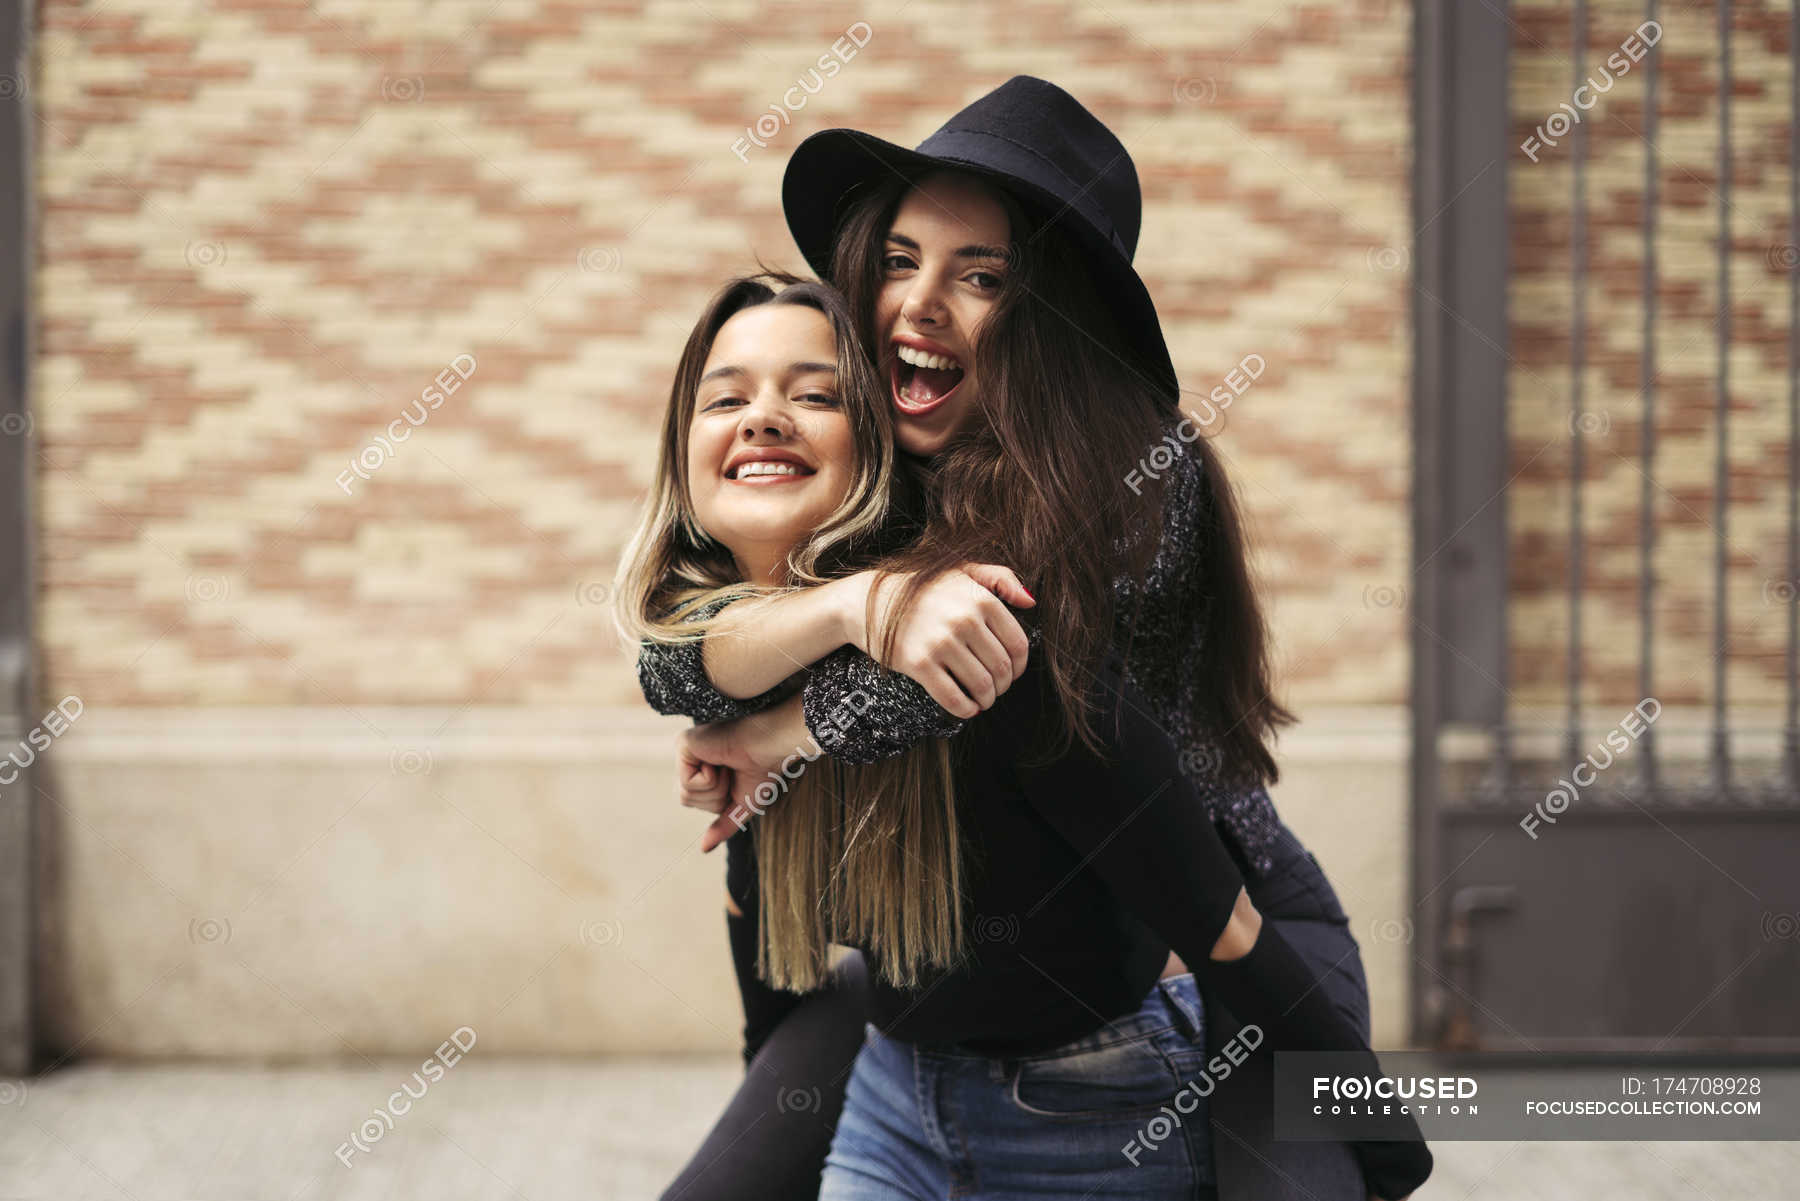 Girl giving her friend a piggyback ride stock photo